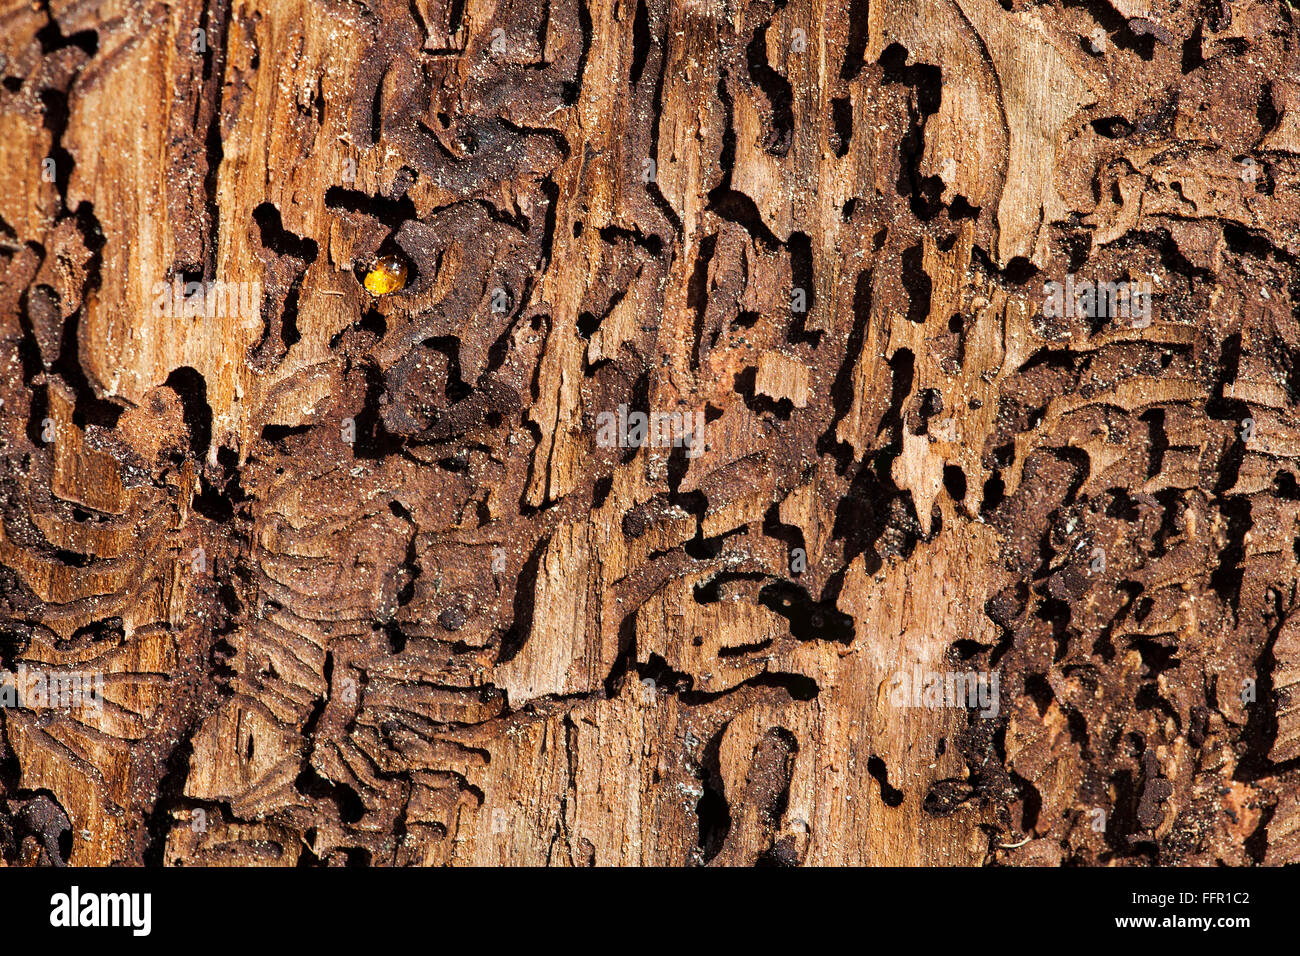 Spruce bark with feeding track from the bark beetle (Ips typographus), Waldhauser, Bavarian Forest, Bavaria, Germany Stock Photo